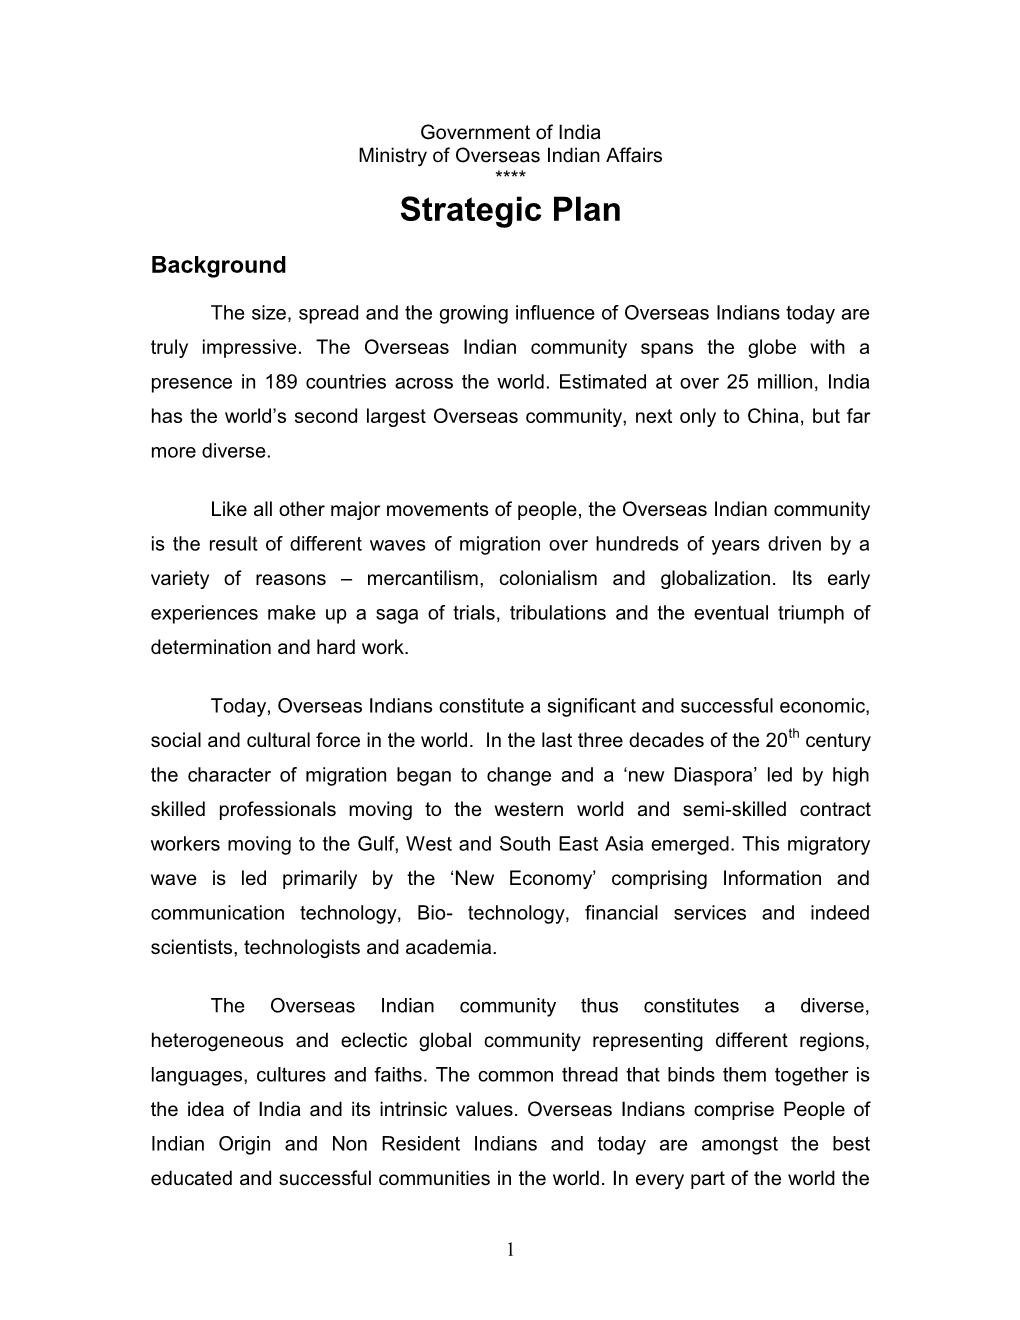 Government of India Ministry of Overseas Indian Affairs **** Strategic Plan